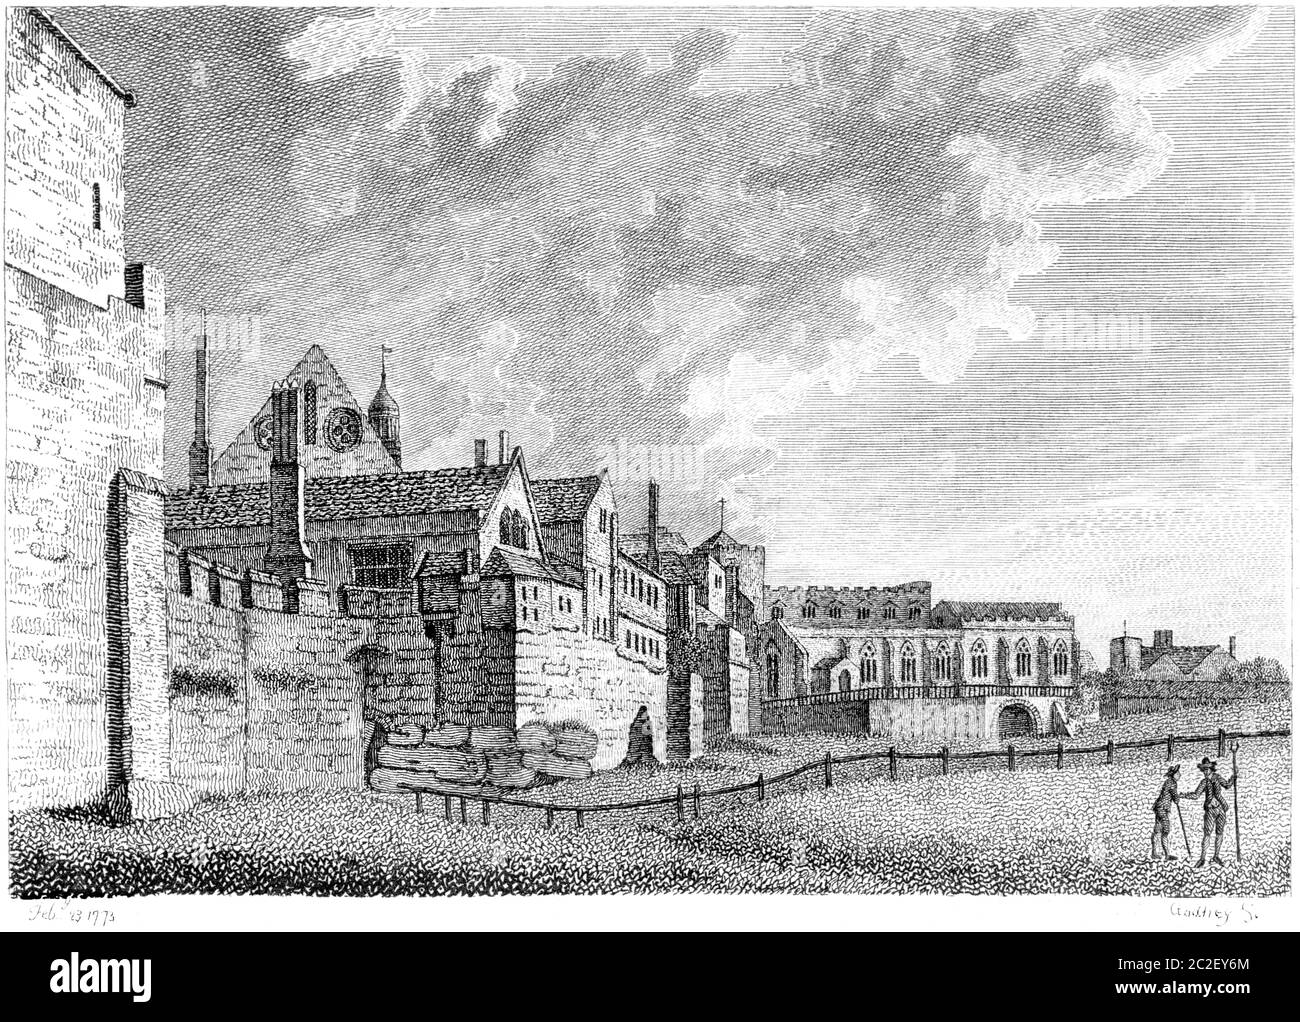 An engraving of Chester Castle February 23 1773 scanned at high resolution from a book published in the 1770s.  Believed copyright free. Stock Photo